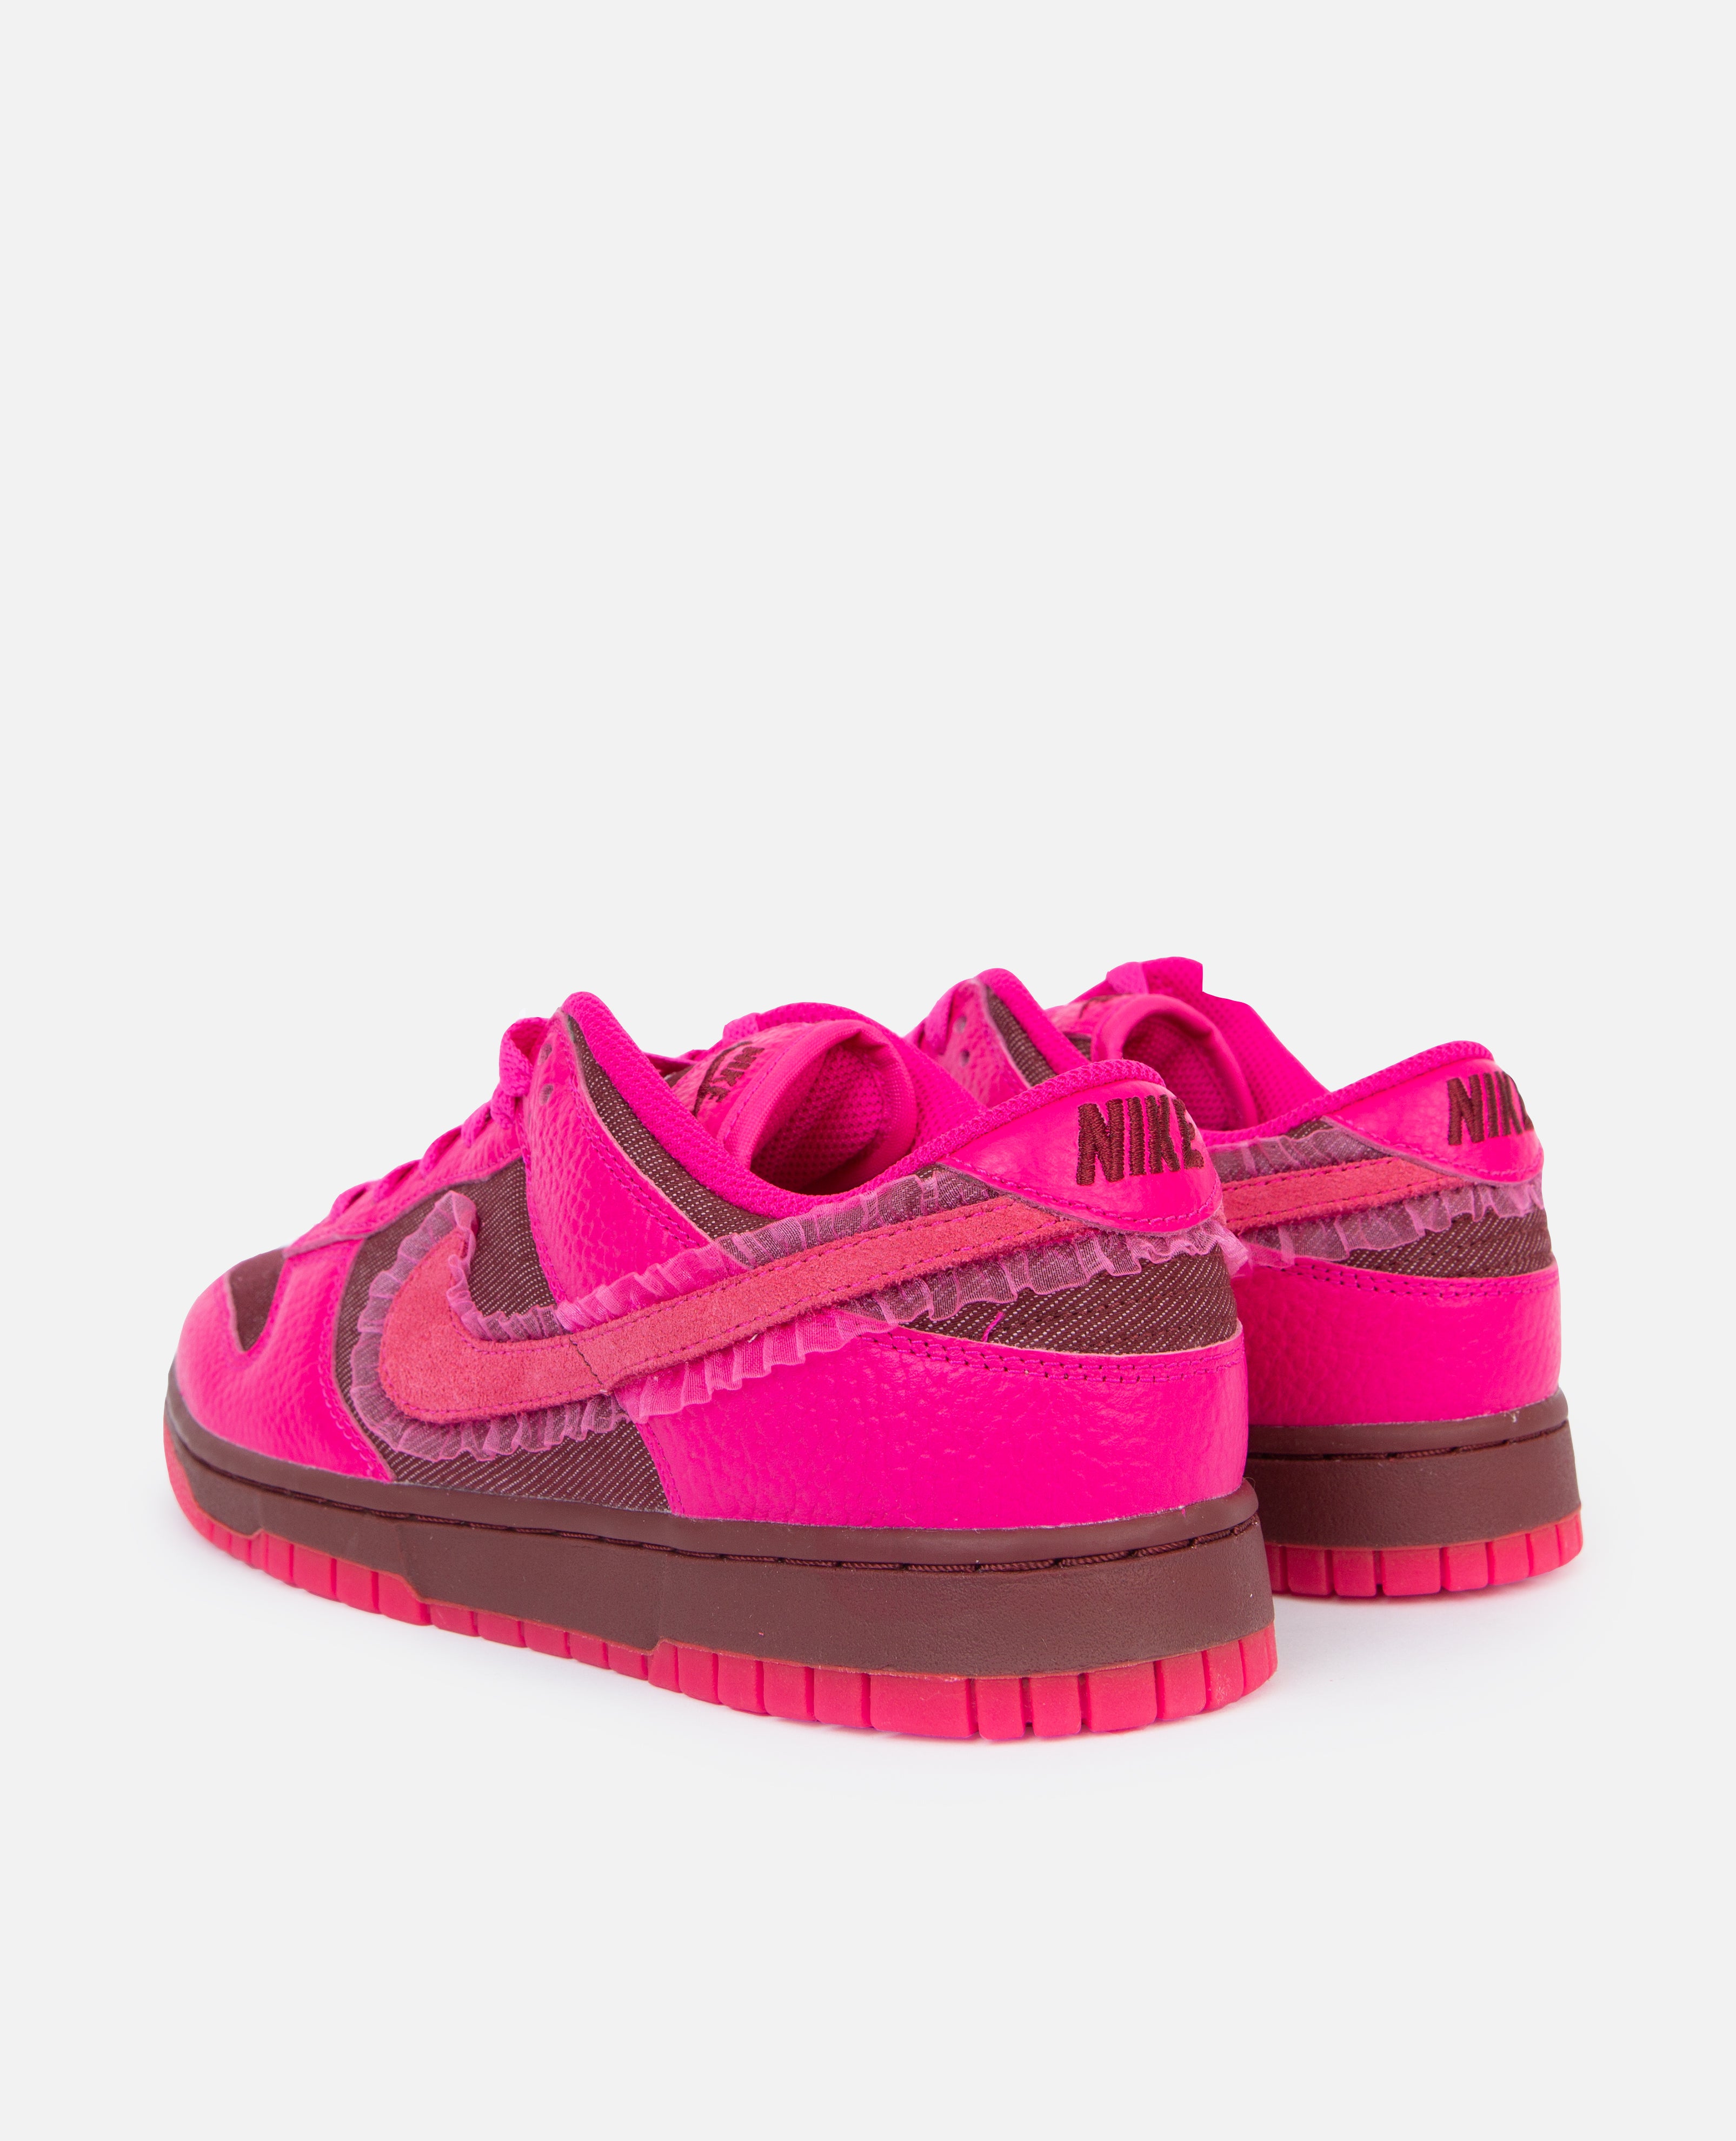 WMNS Nike Dunk Low (Team Red/Pink Prime) – Patta UK